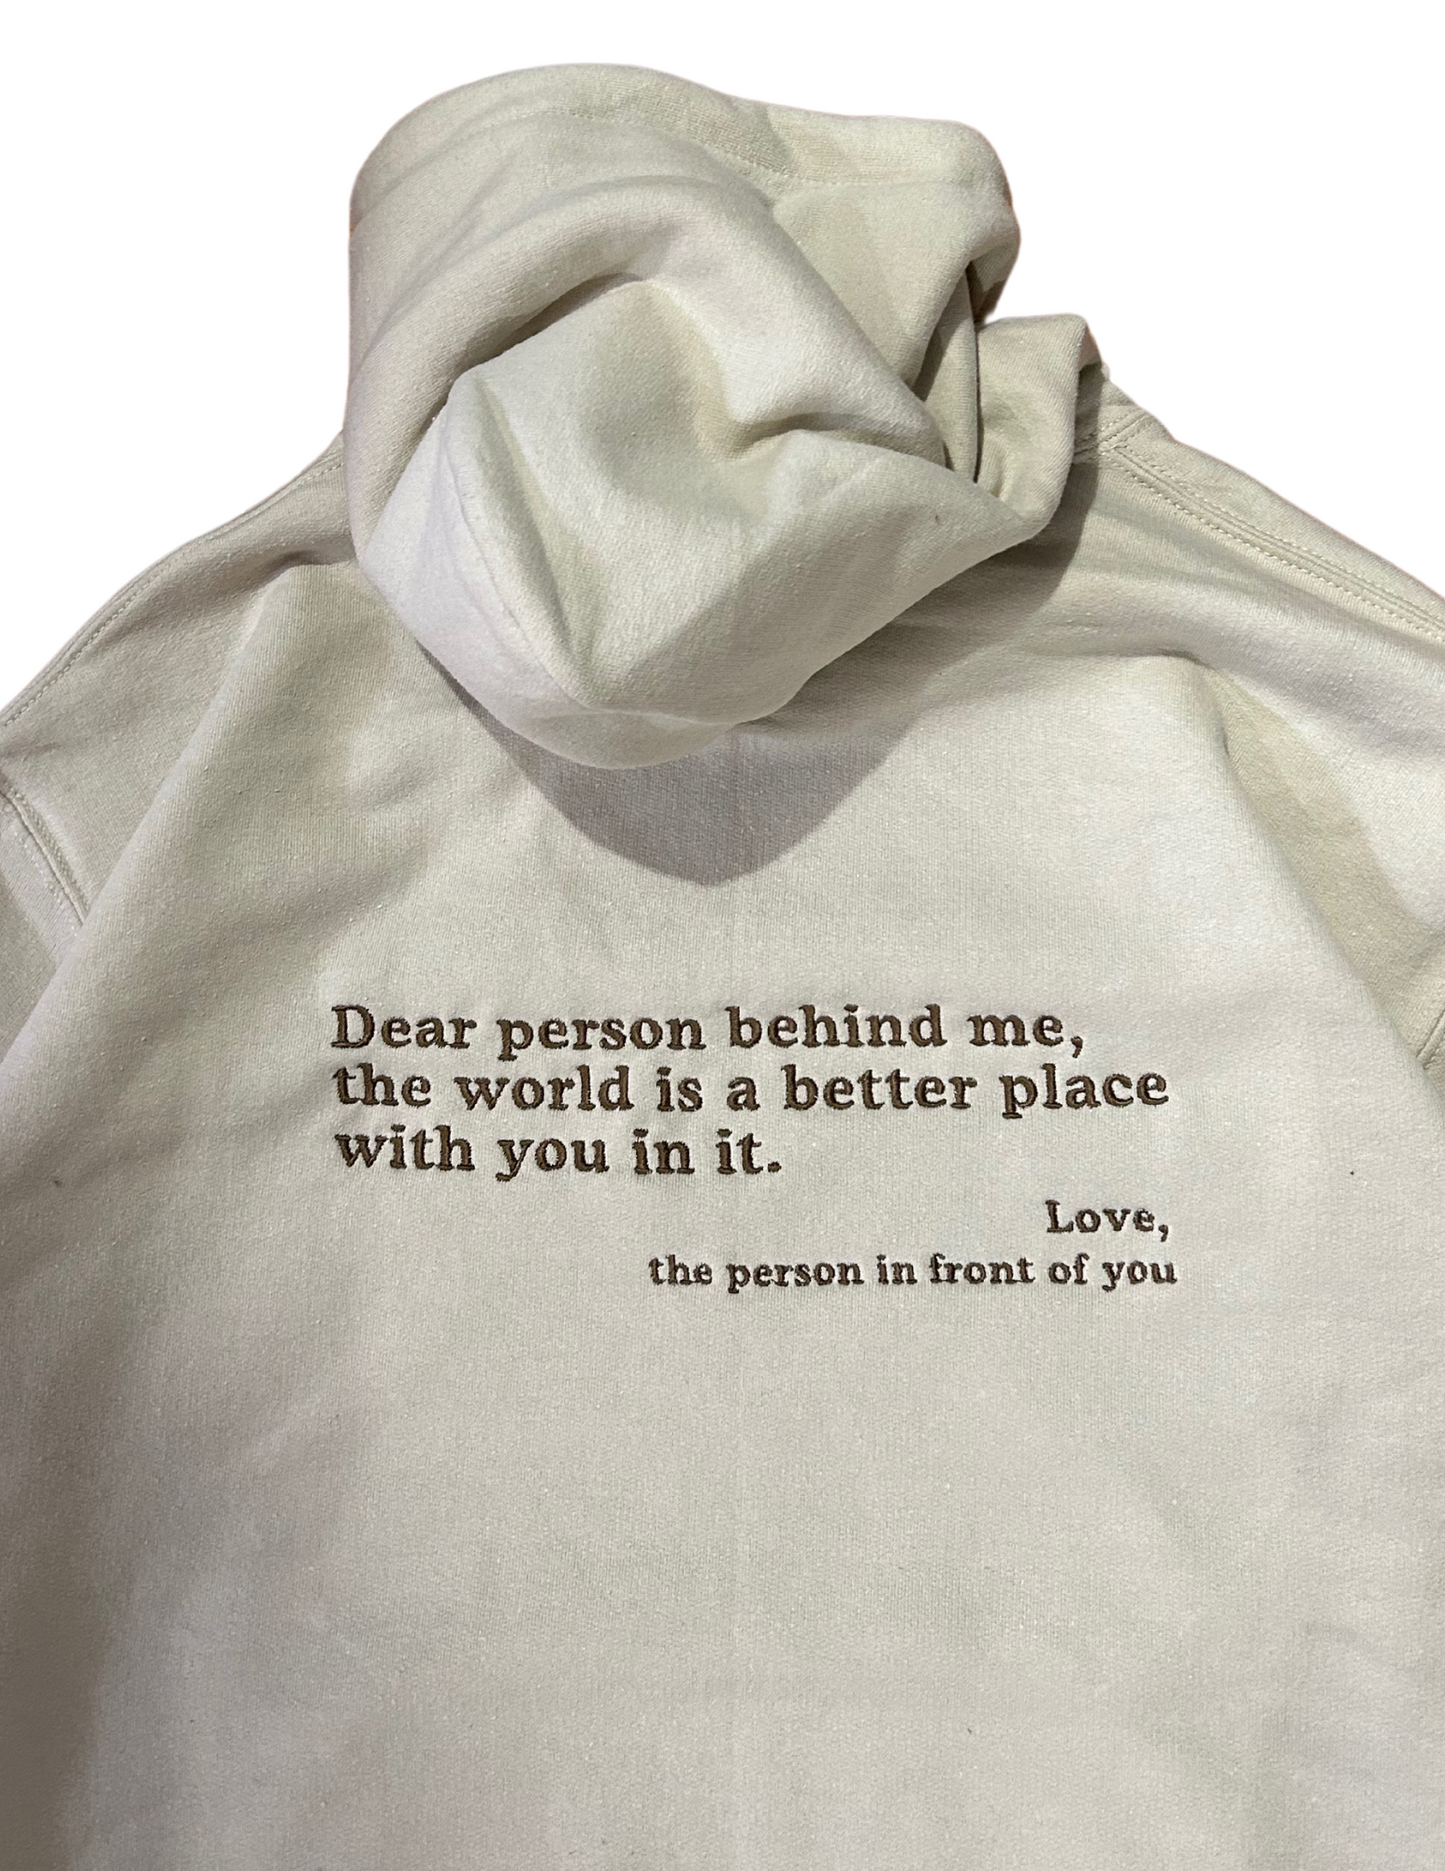 Embroidered 'Mental Health Matters and Dear Person Behind Me' Hoodie or Crew Neck, Long Sleeve, Classic fit, Unisex, Adult